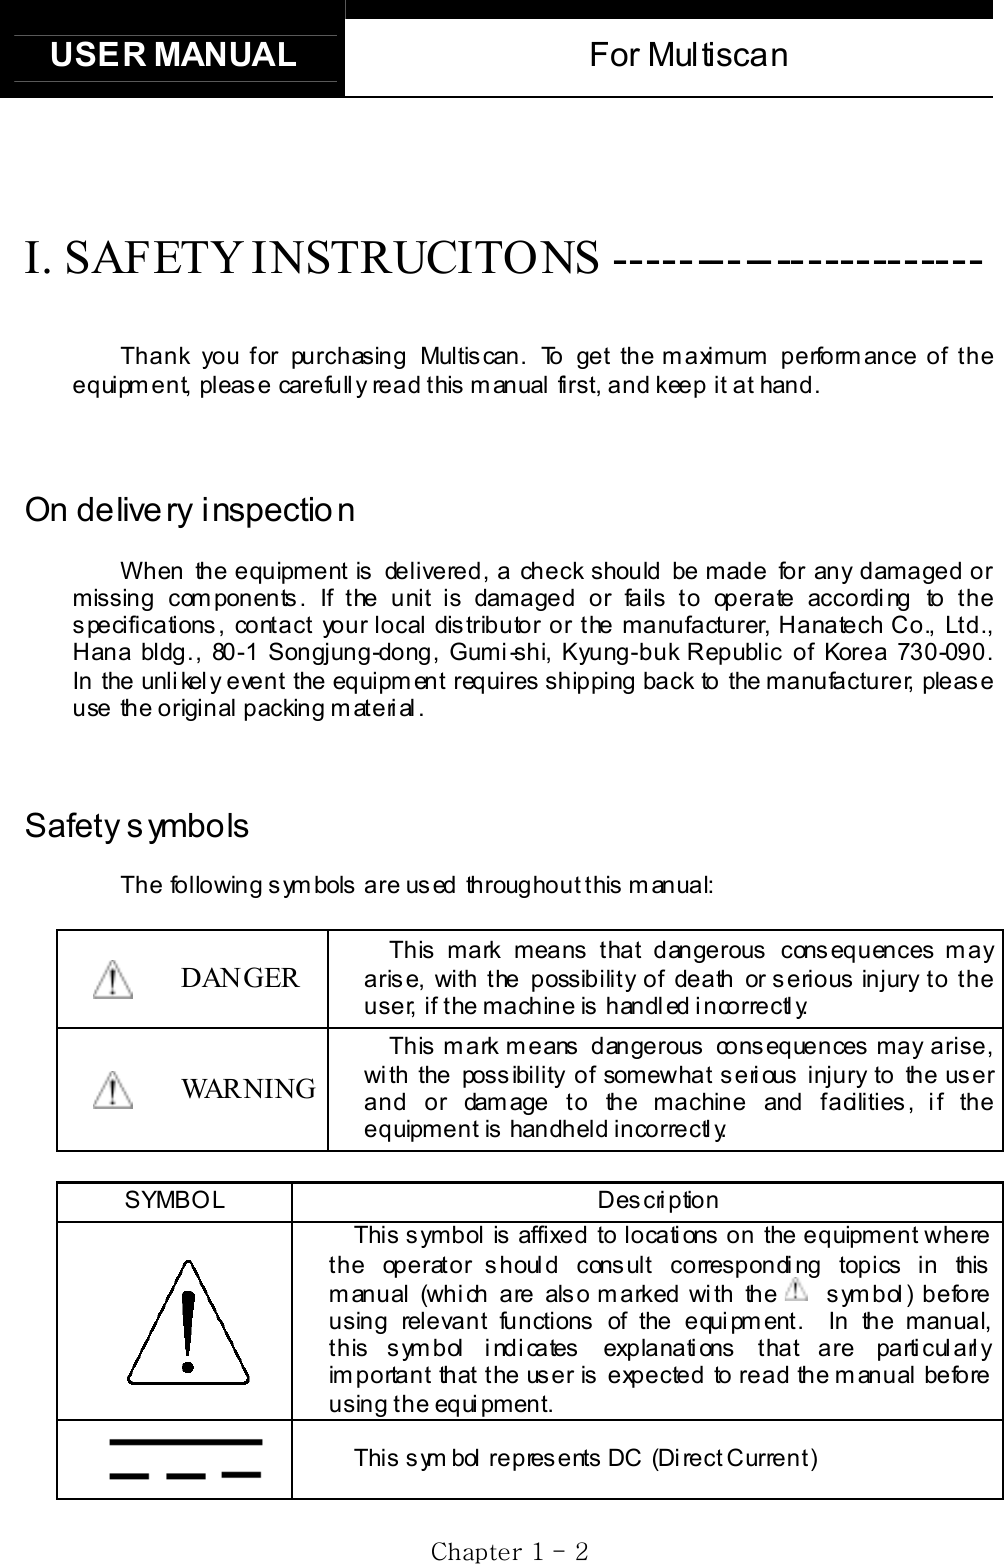 USER MANUAL  For Multiscan   GjGXGTG YGI. SAFETY INSTRUCITONS ----------------------- Thank you for purchasing Multiscan. To get the maximum performance of the equipment, please carefully read this manual first, and keep it at hand. On delivery inspection When the equipment is delivered, a check should be made for any damaged or missing components. If the unit is damaged or fails to operate according to the specifications, contact your local distributor or the manufacturer, Hanatech Co., Ltd., Hana bldg., 80-1 Songjung-dong, Gumi-shi, Kyung-buk Republic of Korea 730-090.  In the unli kel y event the equipm ent requires  shipping back to the manufacturer, pleas e use  the original packing material. Safety symbols The following symbols are used throughout this manual: DANGER This mark means that dangerous consequences may arise, with the possibility of death or serious injury to the user, if the machine is handled incorrectly. WARNING This mark means  dangerous  consequences may arise, with the possibility of somewhat serious injury to the user and or damage to the machine and facilities, if the equipment is handheld incorrectl y.  SYMBOL Description This symbol is affixed to locations on the equipment where the operat or s houl d cons ult correspondi ng topics  in this manual (which are also marked with the symbol) before using relevant functions of the equipment.  In the manual, this symbol indicates  explanations that are particularly important that the user is expected to read the manual before using the  equi pment.  This sym bol represents DC  (Direct Current) 